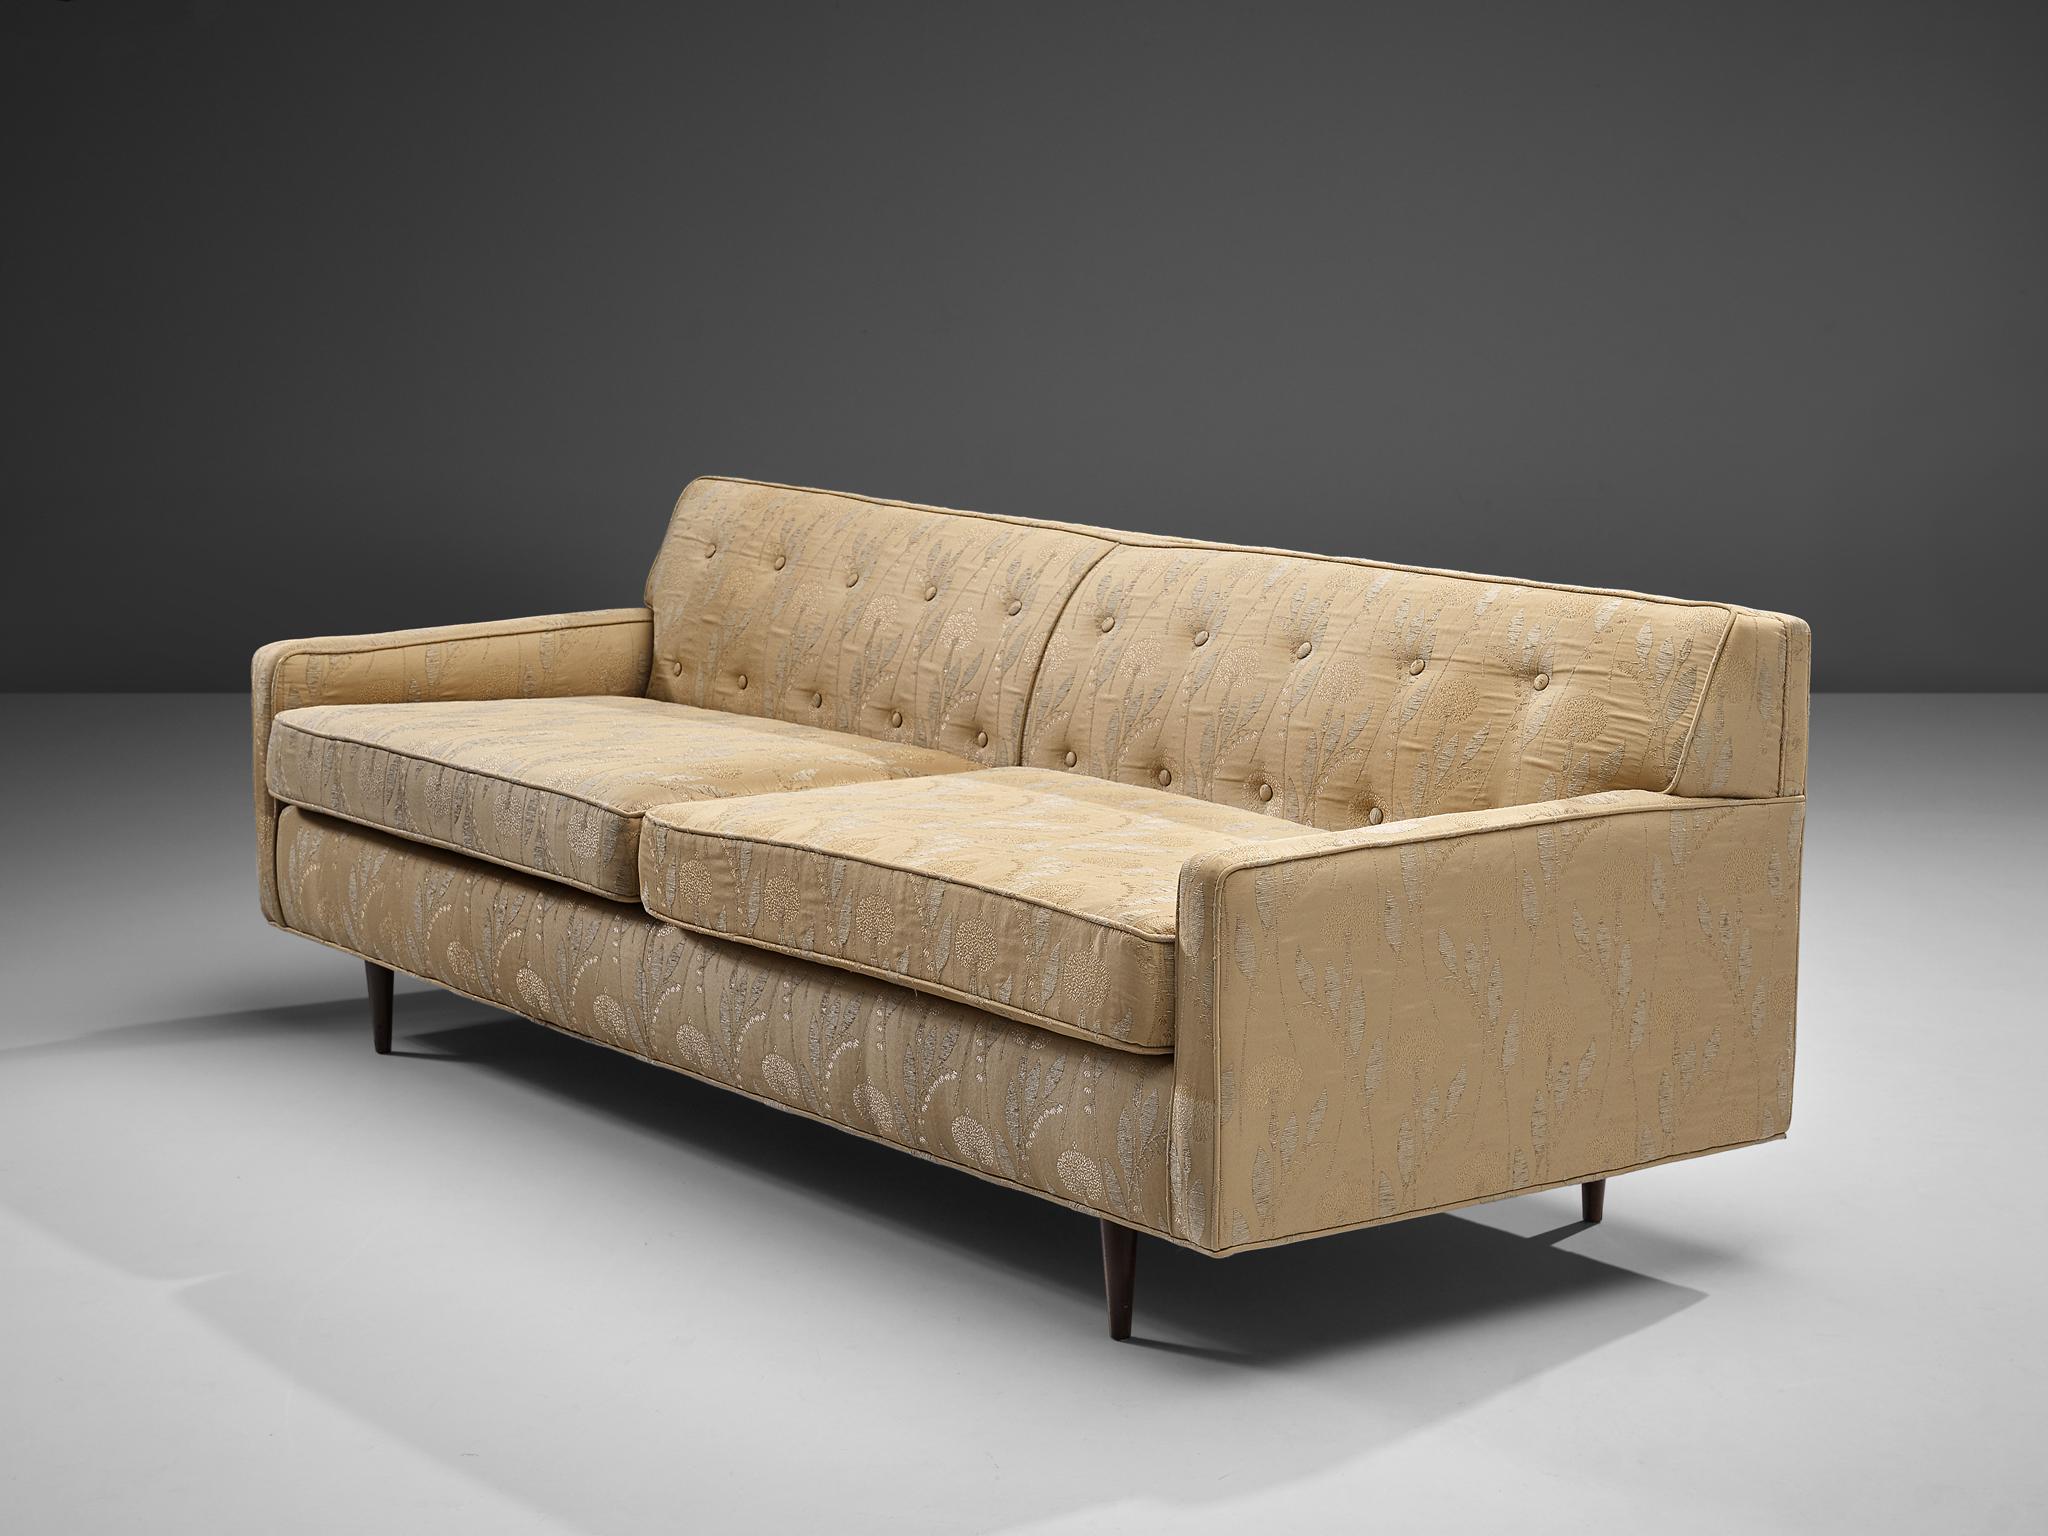 Edward Wormley for Dunbar, sofa, model 5125, fabric, stained wood, United States, 1950s

This cubic shaped sofa is designed by Edward Wormley for Dunbar. The sofa features a cubic-shaped construction with clear lines and simple geometry dominating